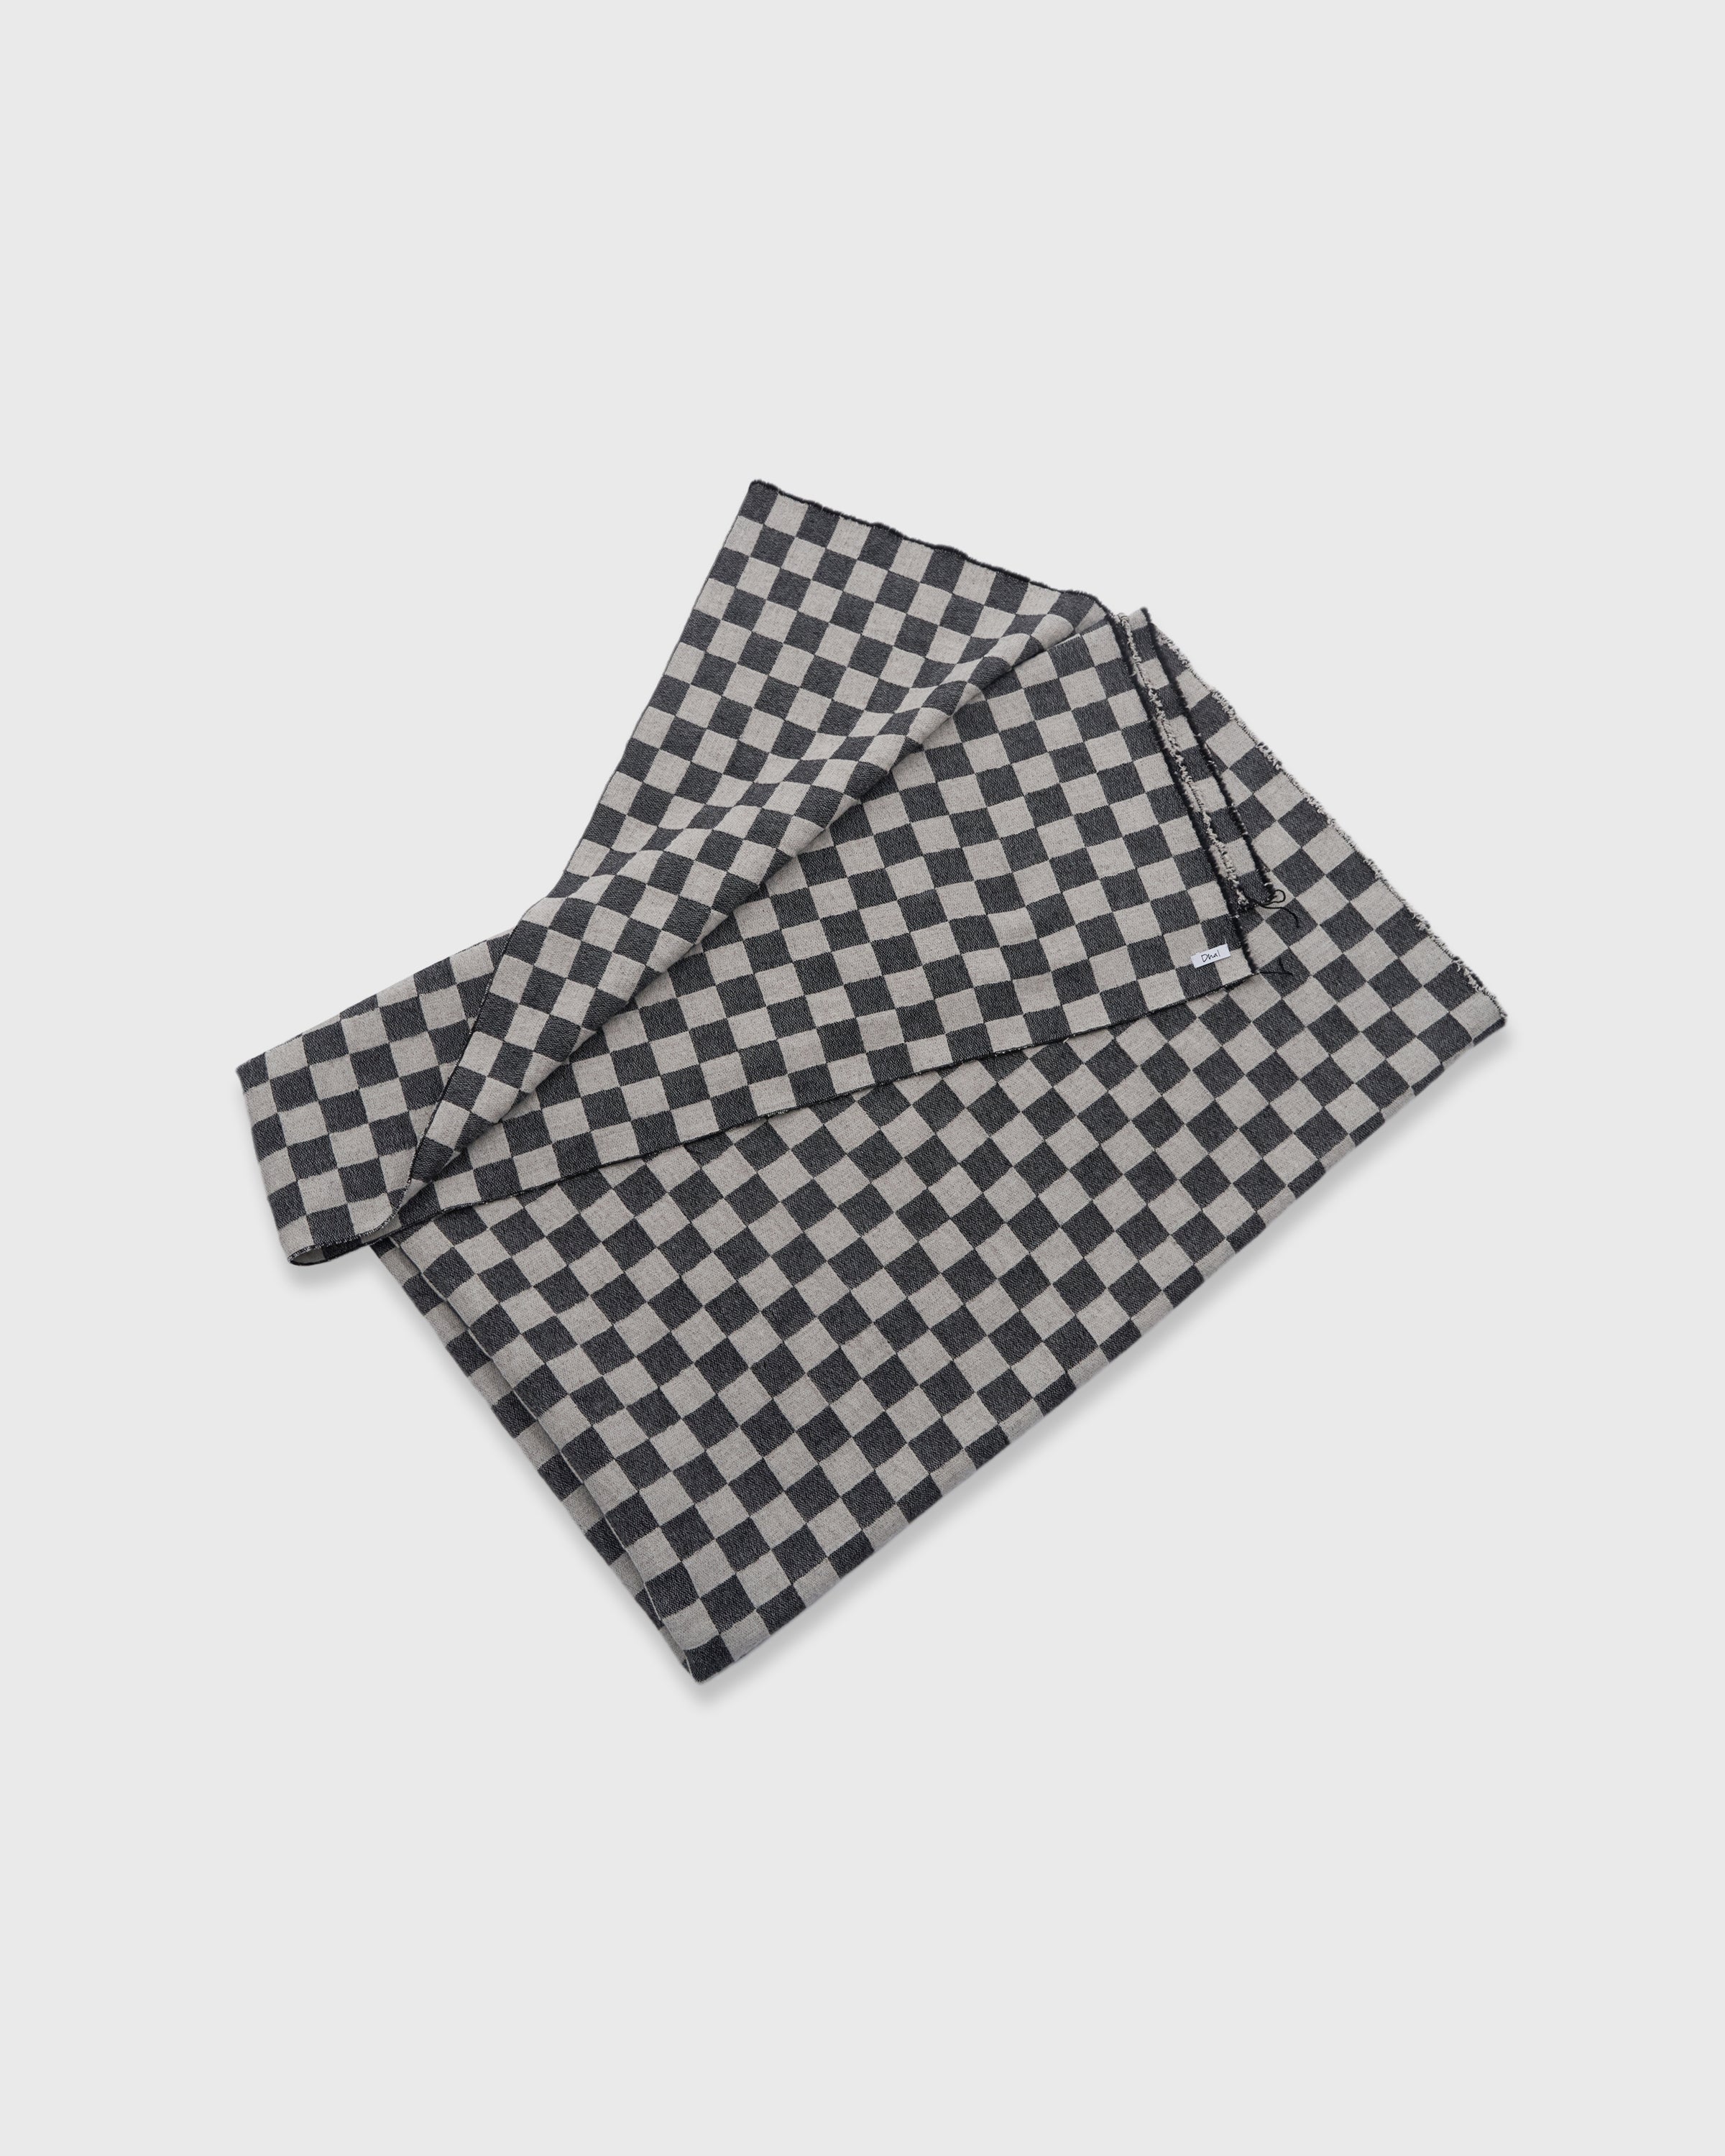 Dhal Checkered Double Cloth Tweed Stole, Black